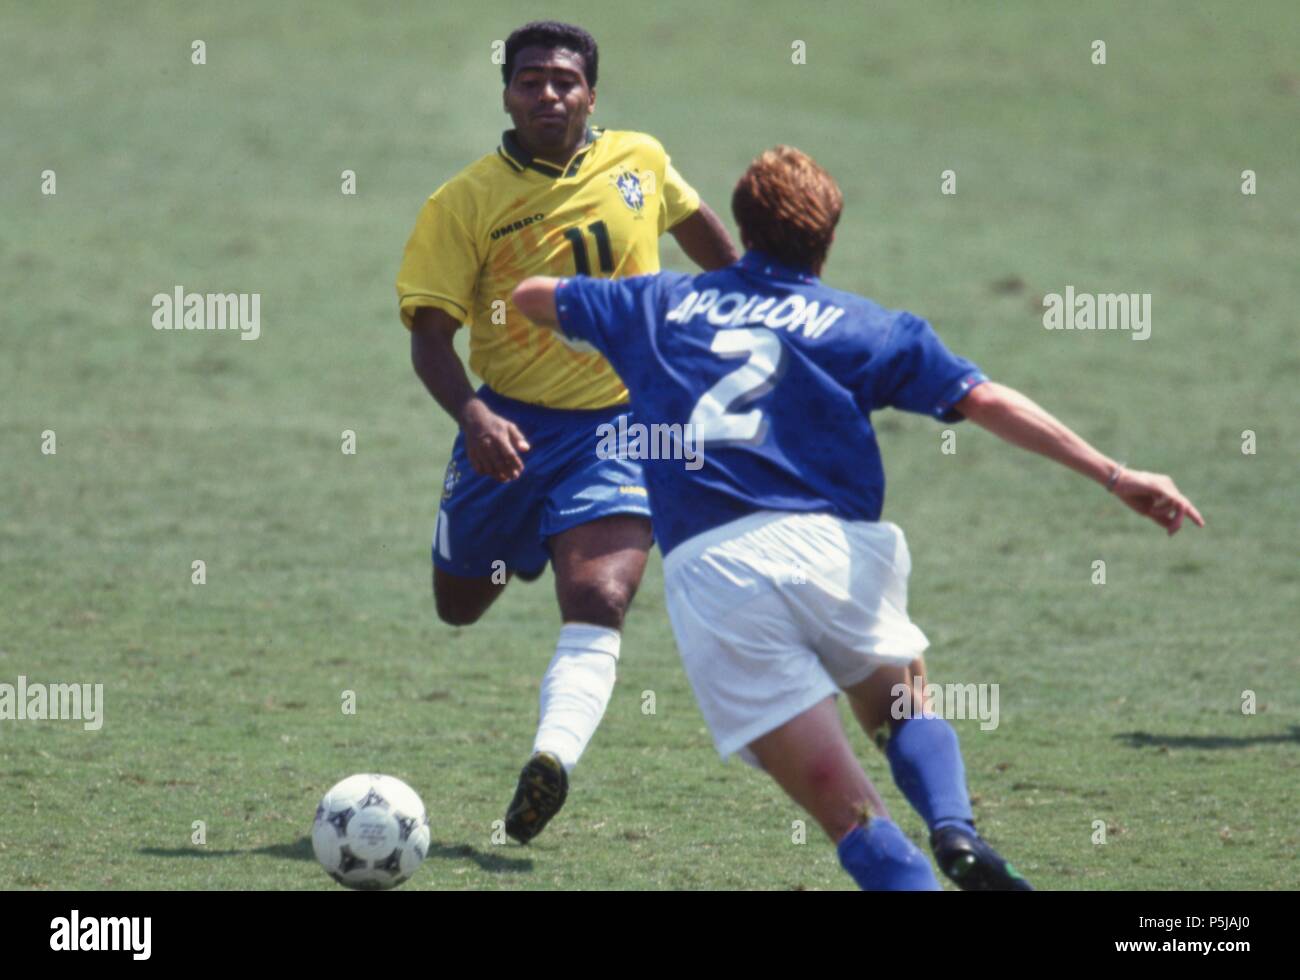 Los Angeles, USA. 27th June, 2018. firo Football, 17.07.1994 World Cup 1994 Final Brazil - Italy 3: 2 nVuE Team Brazil, presentation ceremony, with trophy Romario, | usage worldwide Credit: dpa/Alamy Live News Stock Photo